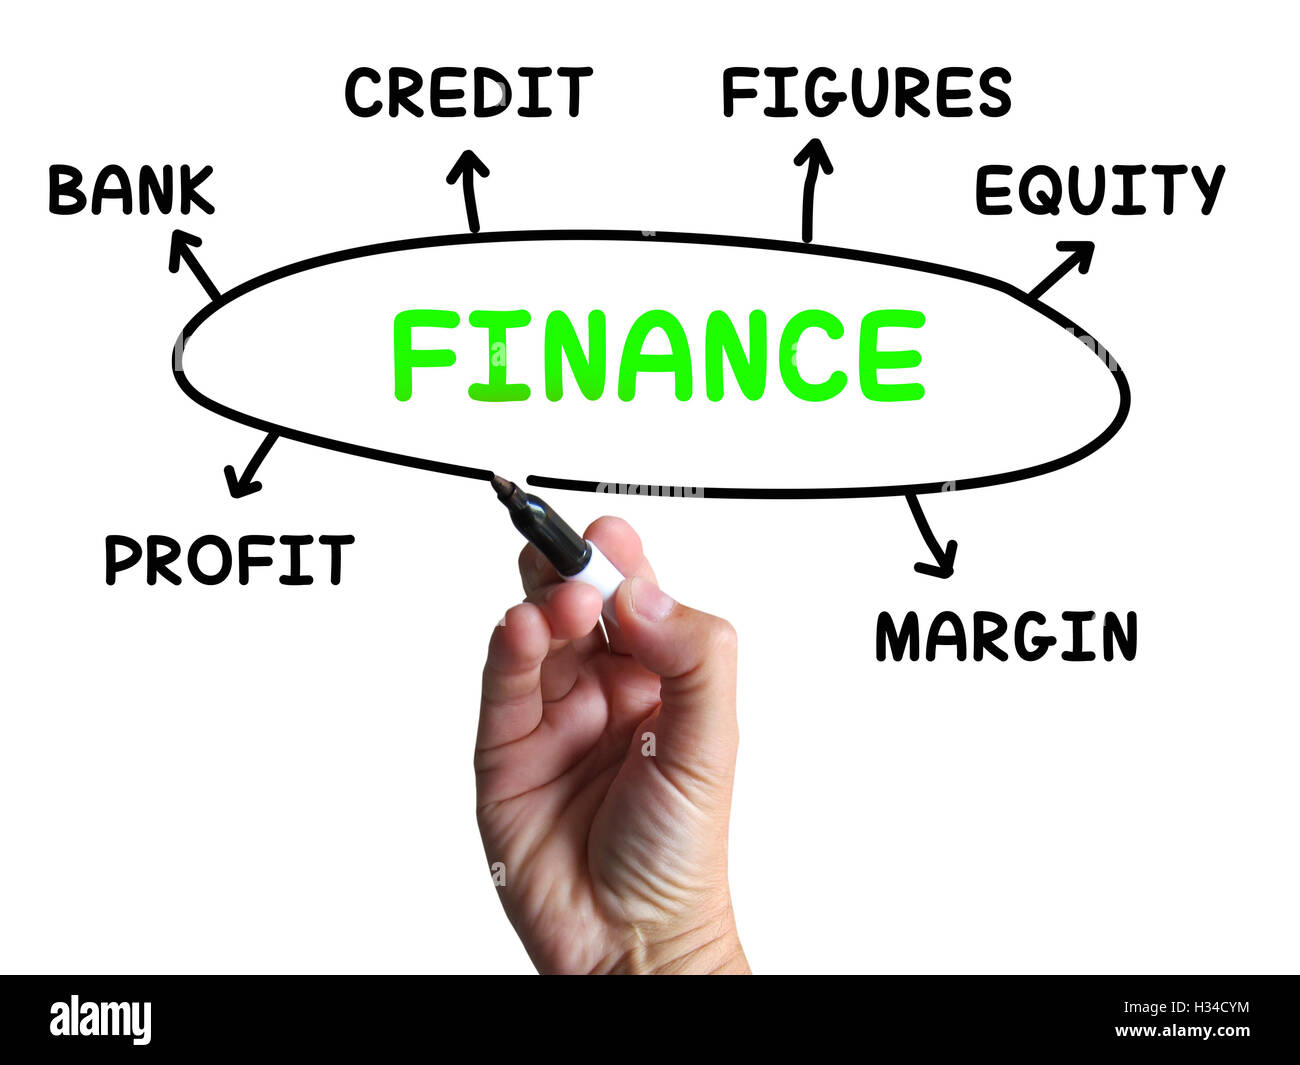 Finance Diagram Shows Credit Equity And Margin Stock Photo